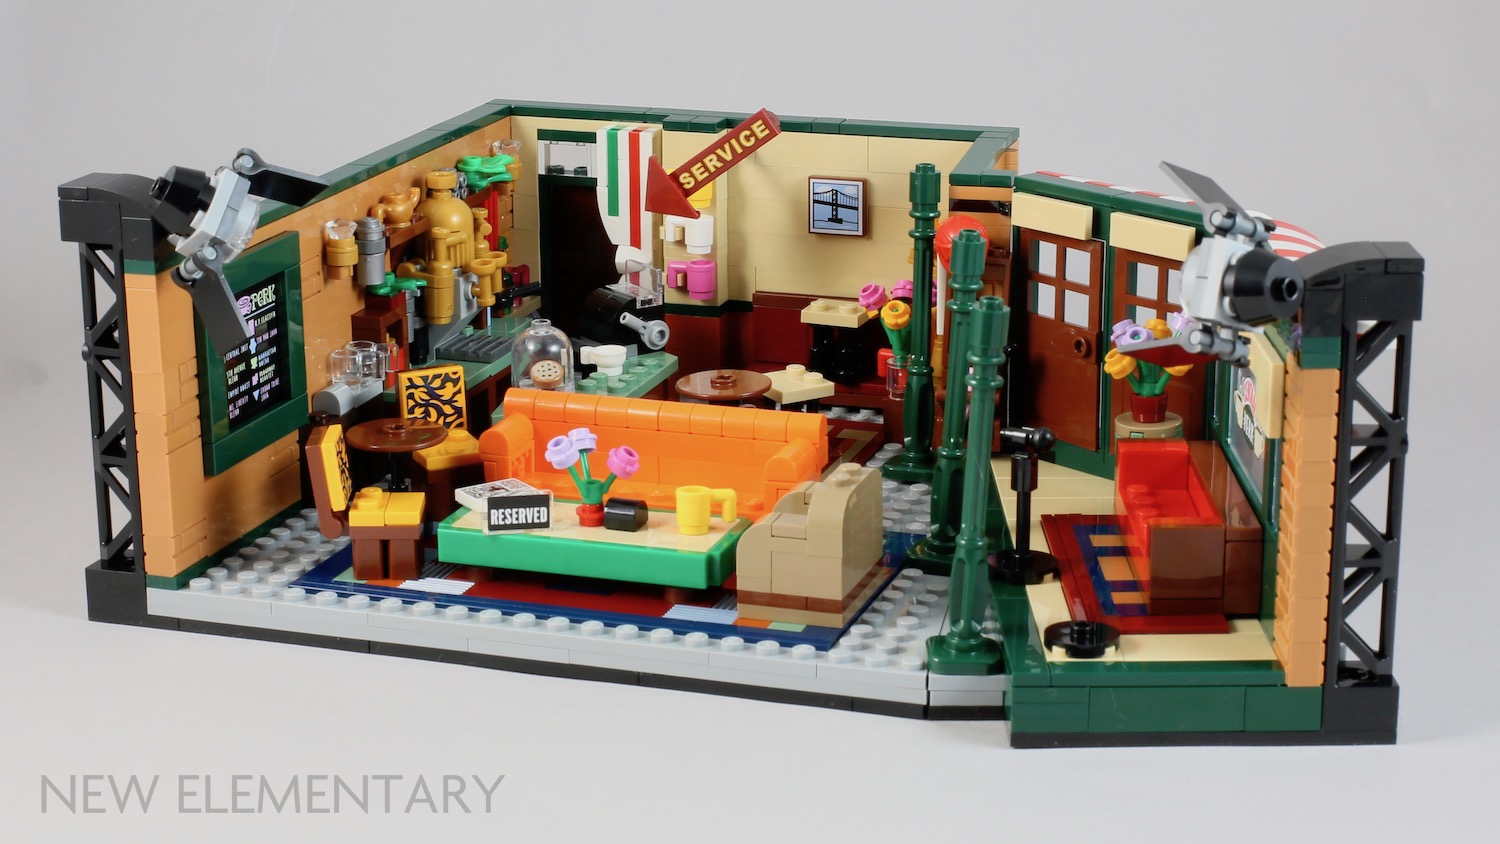 LEGO Ideas 21319 Friends Central Perk - could it BE any more 90's? [Review]  - The Brothers Brick